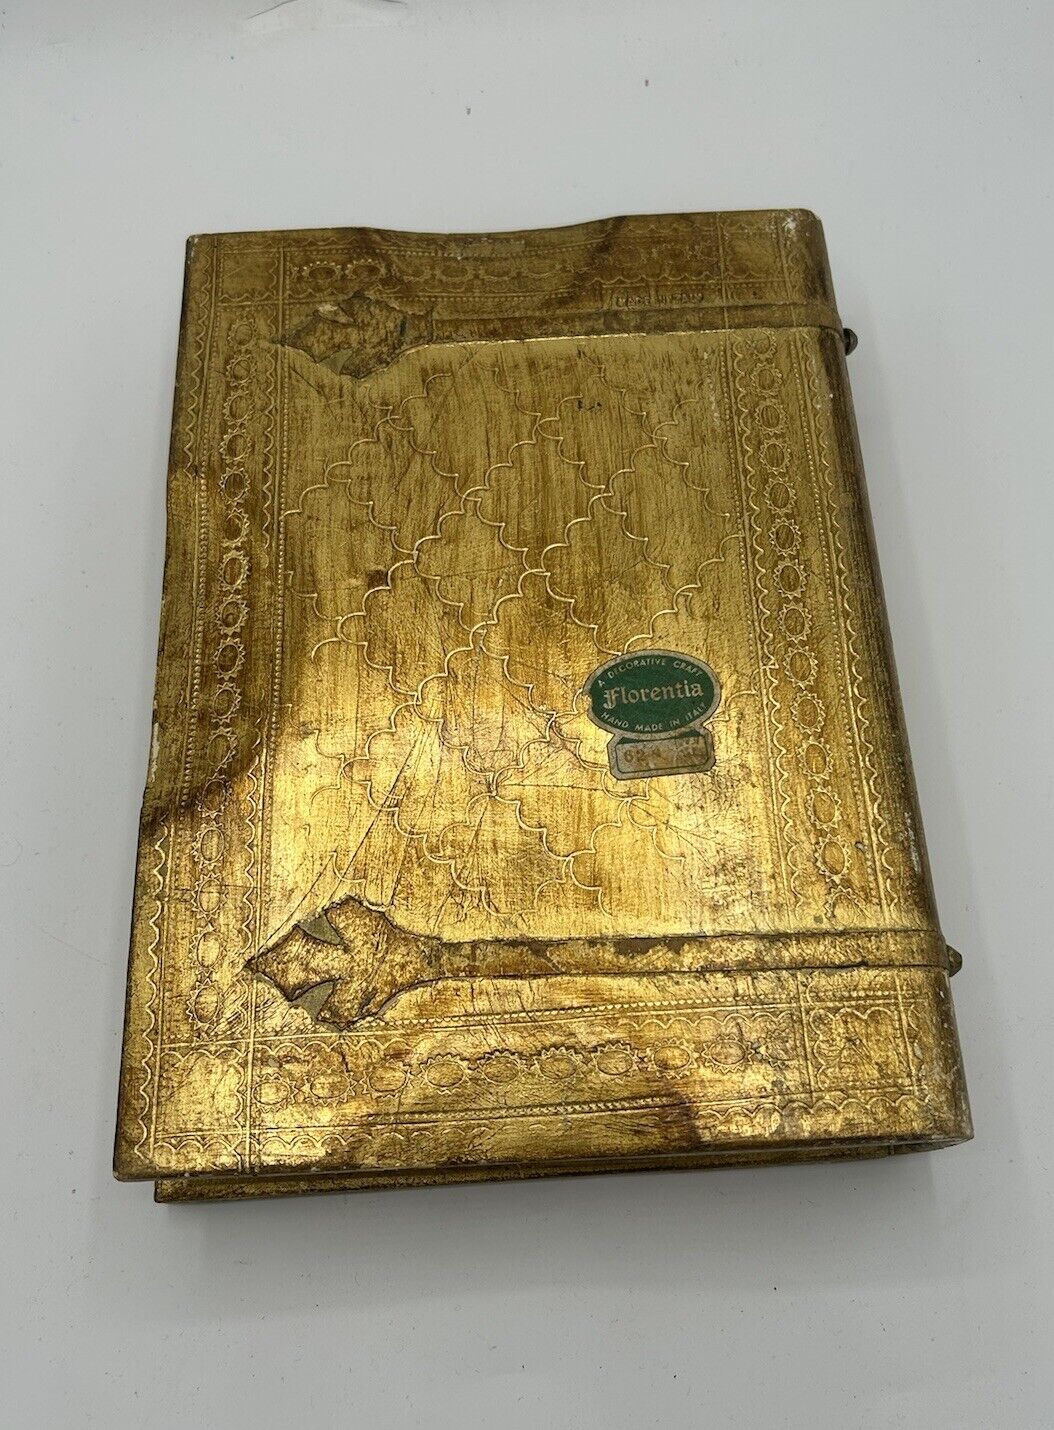 Florentia Stacked Book Wooden Box Cloth Lined Florentine Italy Vintage Gilt Wood